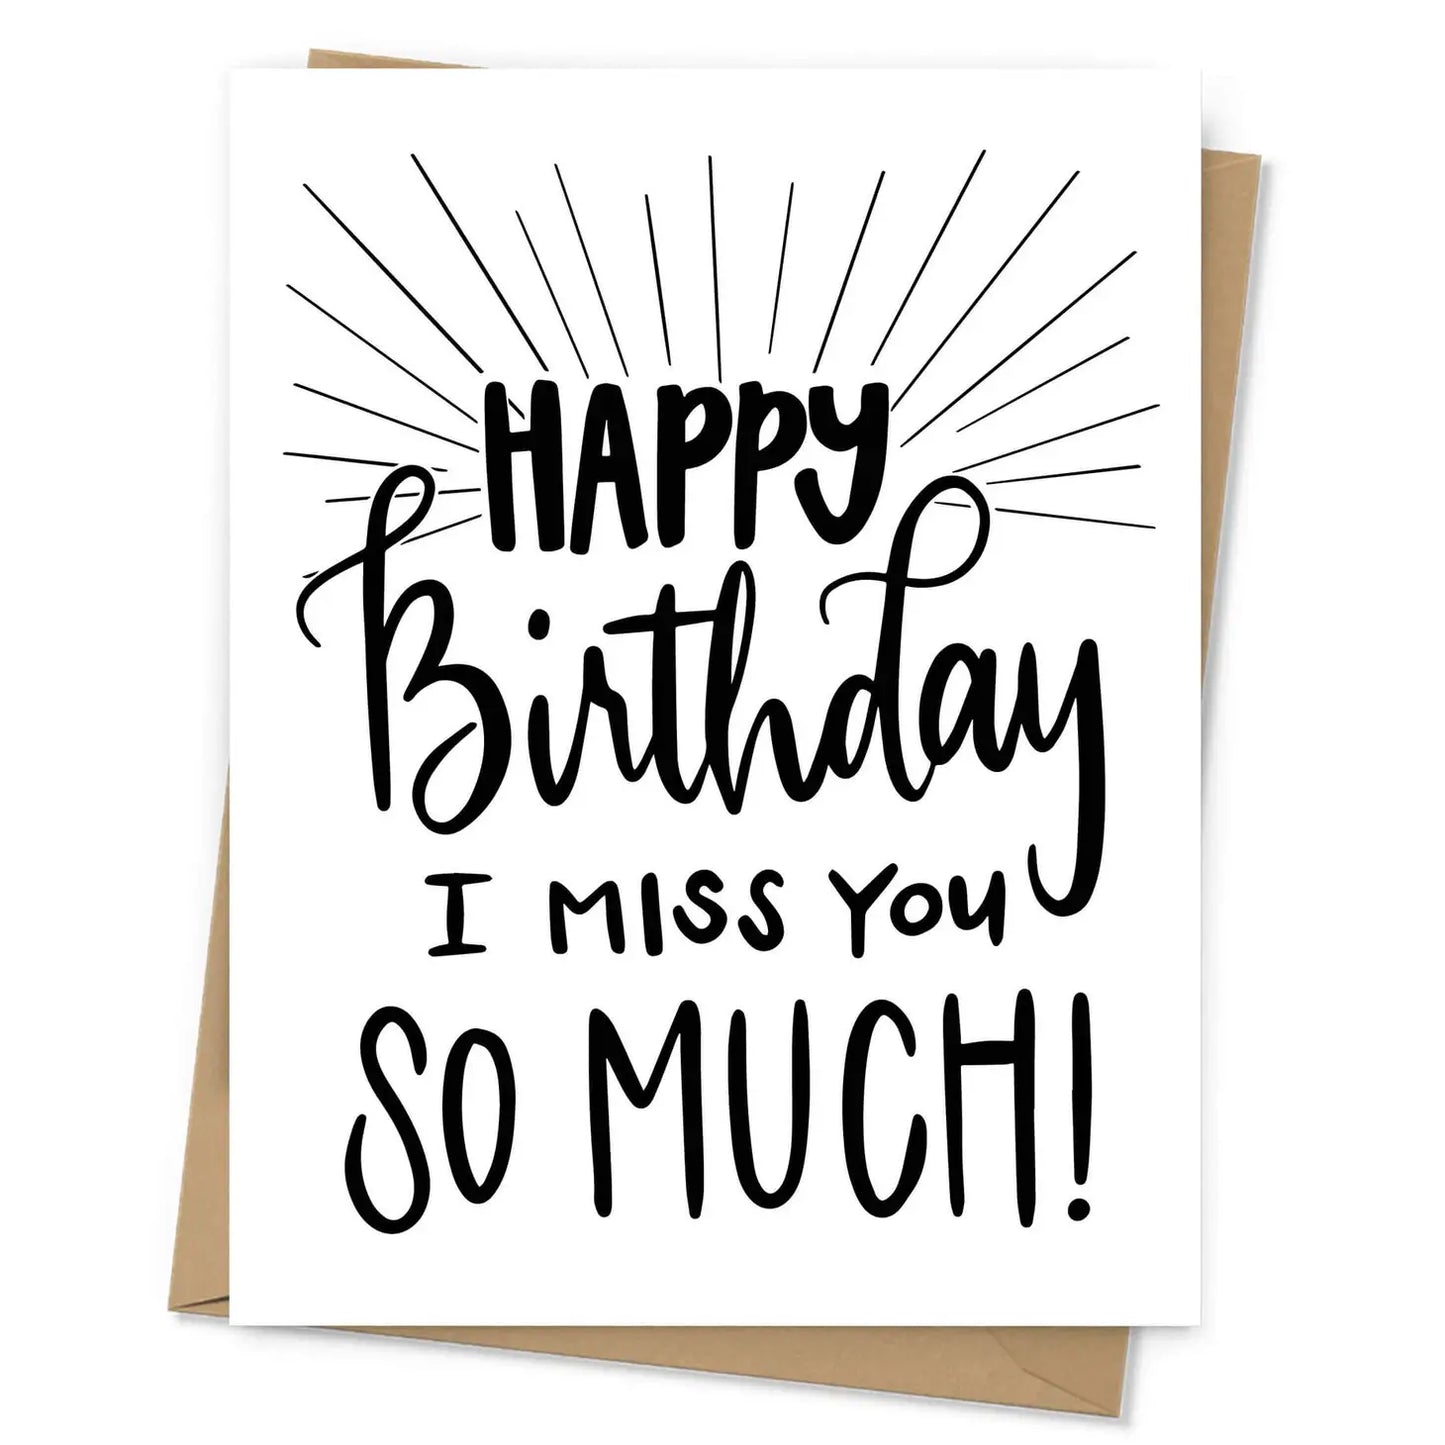 "Happy Birthday I Miss You So Much!" Greeting Card